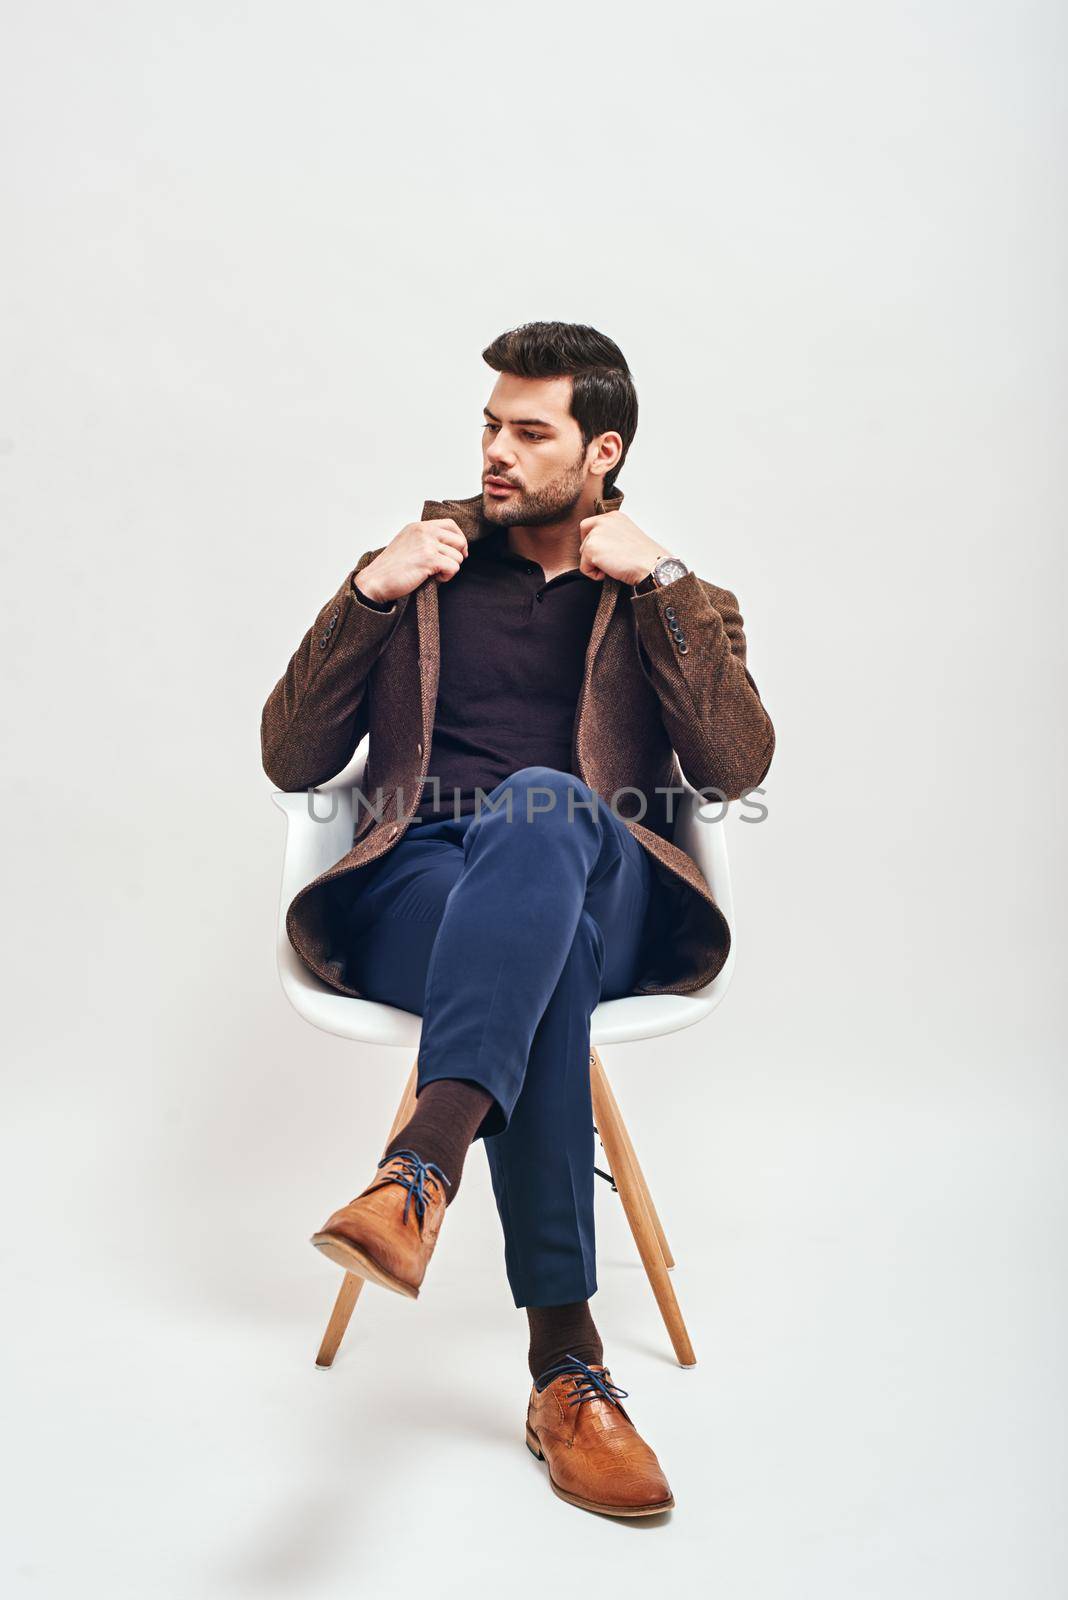 Confident in his style. Stylish dark-haired man sitting on a chair, crossing his legs and looking away isolated over white background by friendsstock